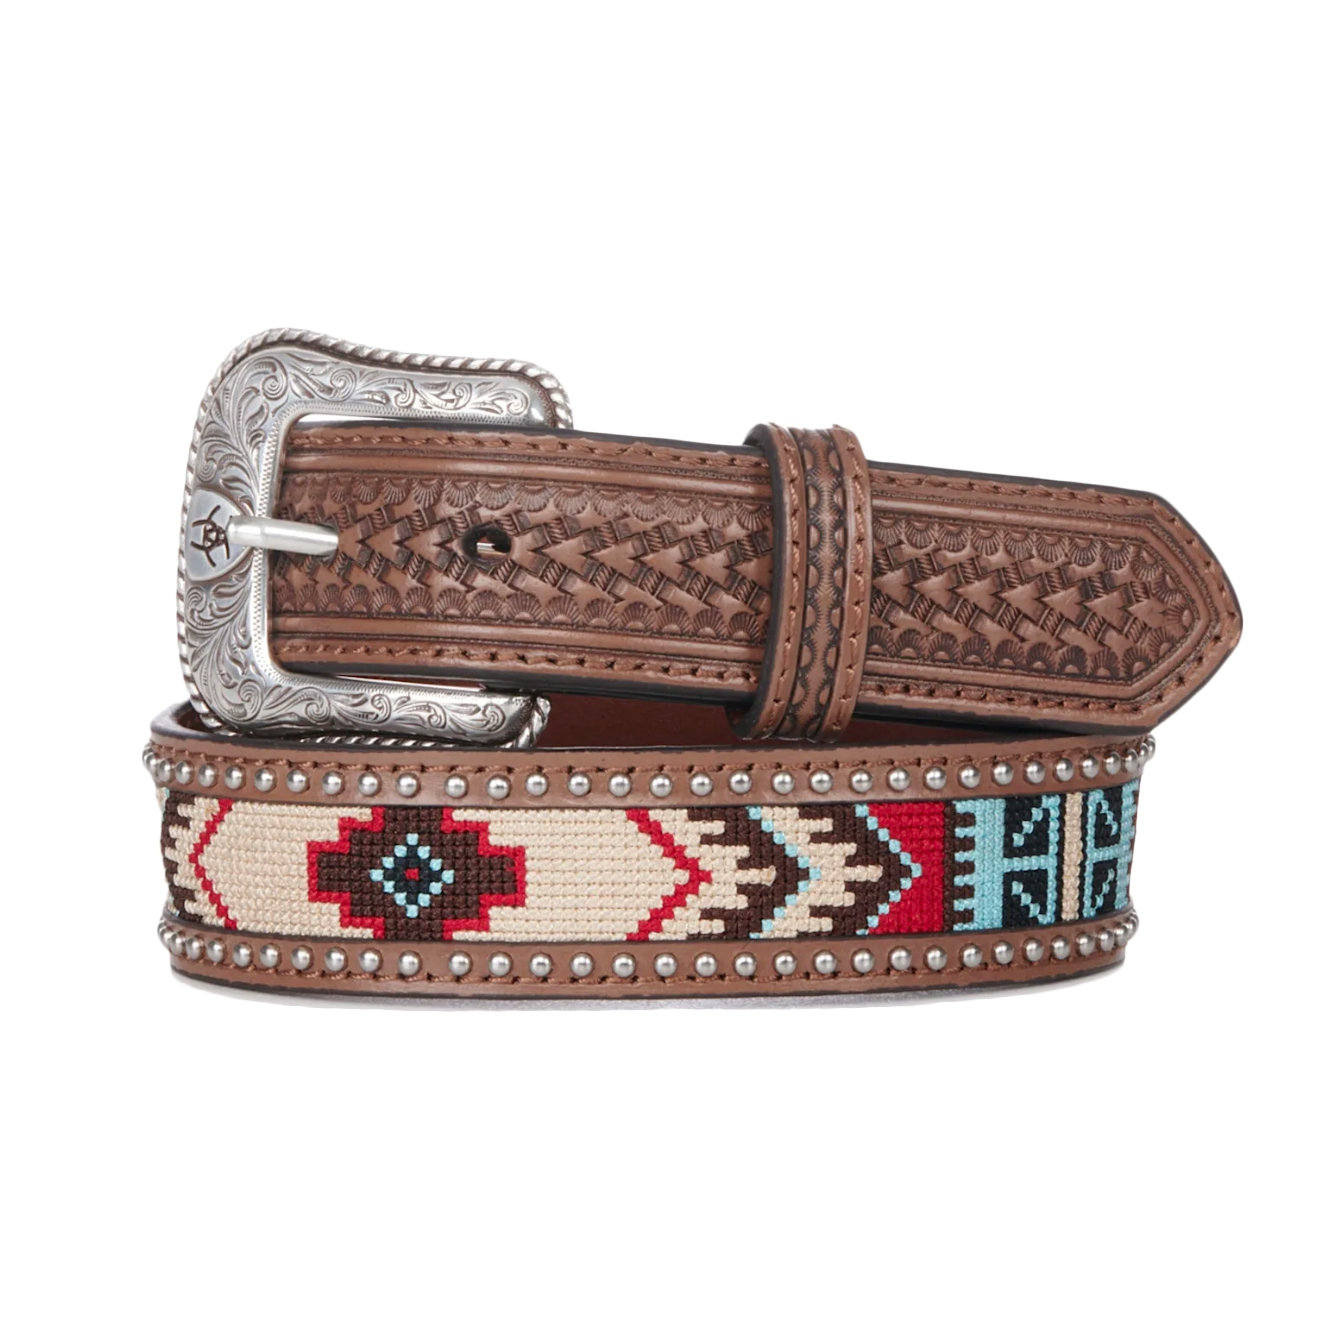 Ariat Men's Brown Basketweave Western Belt with Aztec Fabric and Studs